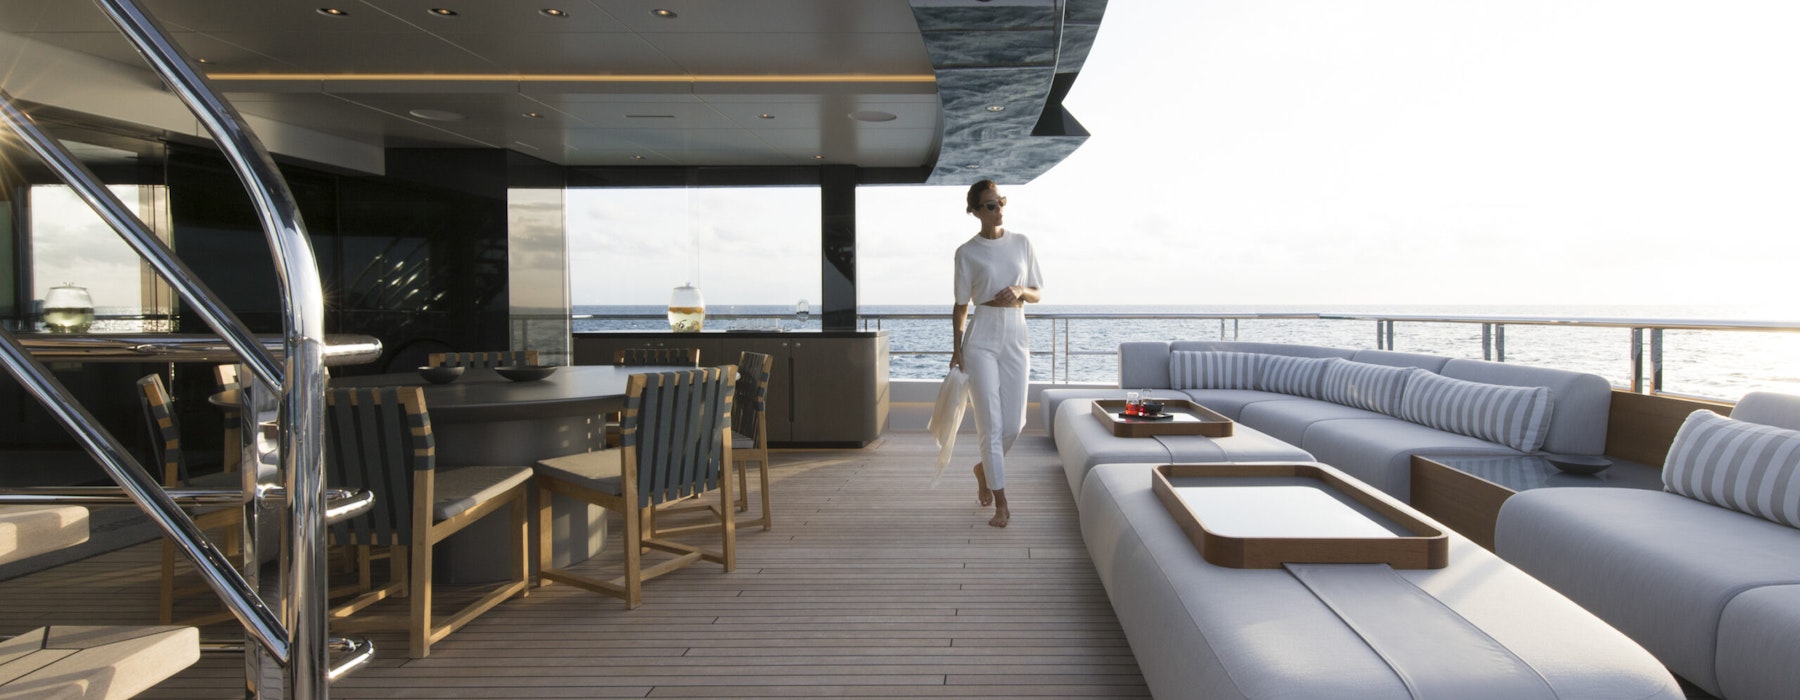 How to charter a private yacht